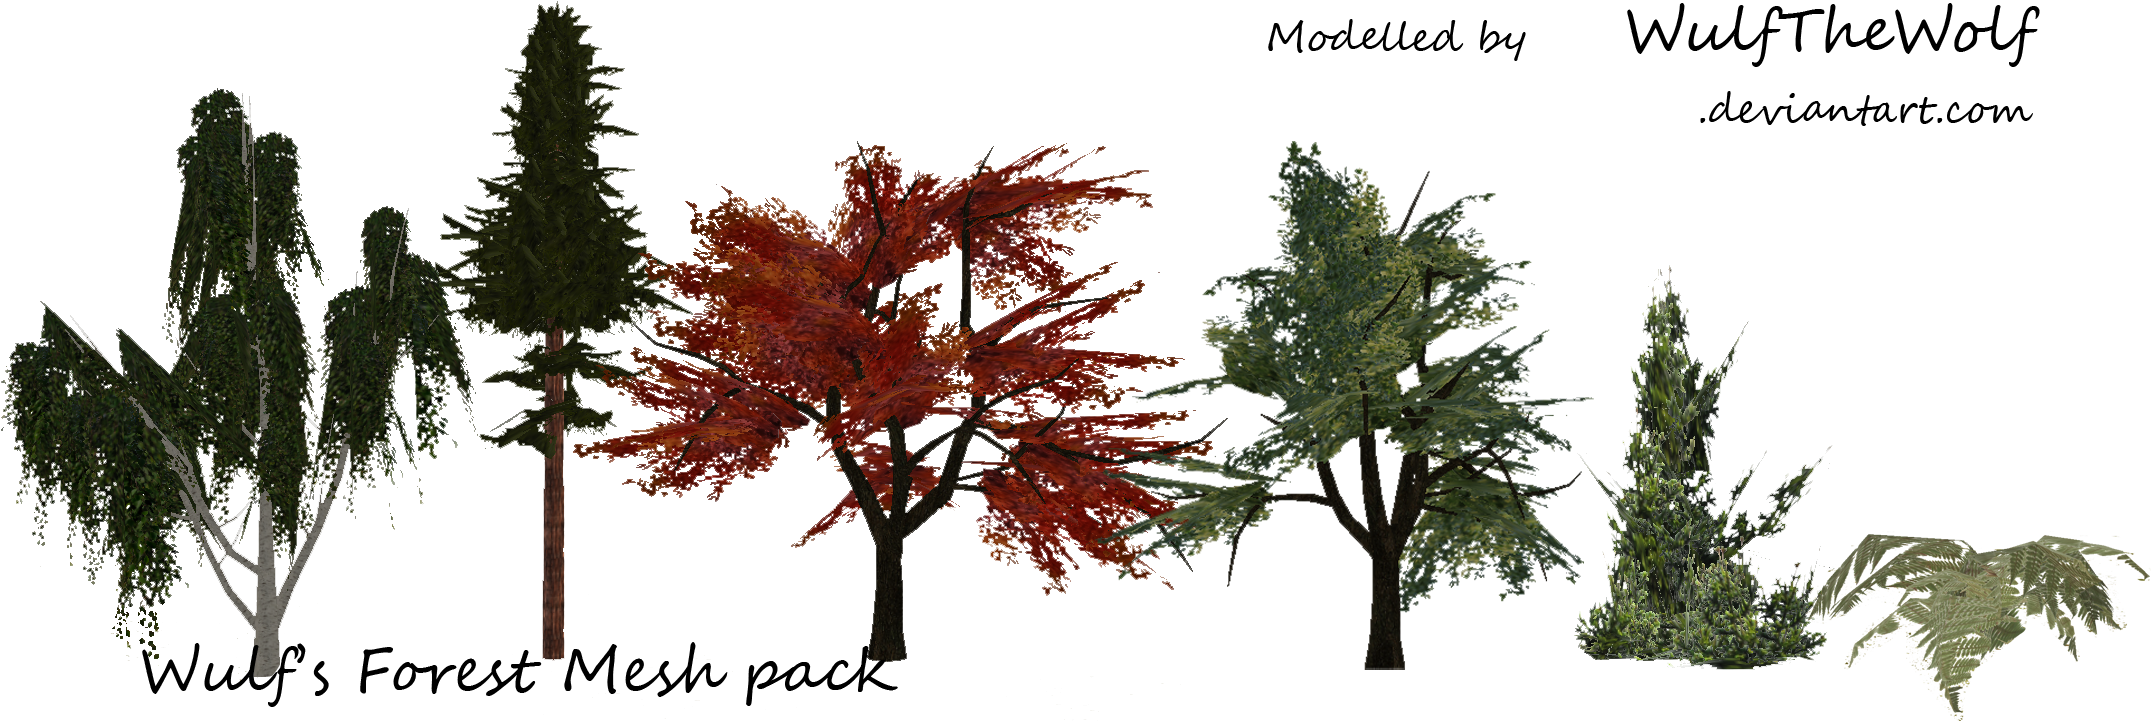 Forest Meshes By Mossasaurus - Feral Heart Tree Meshes (2150x761)